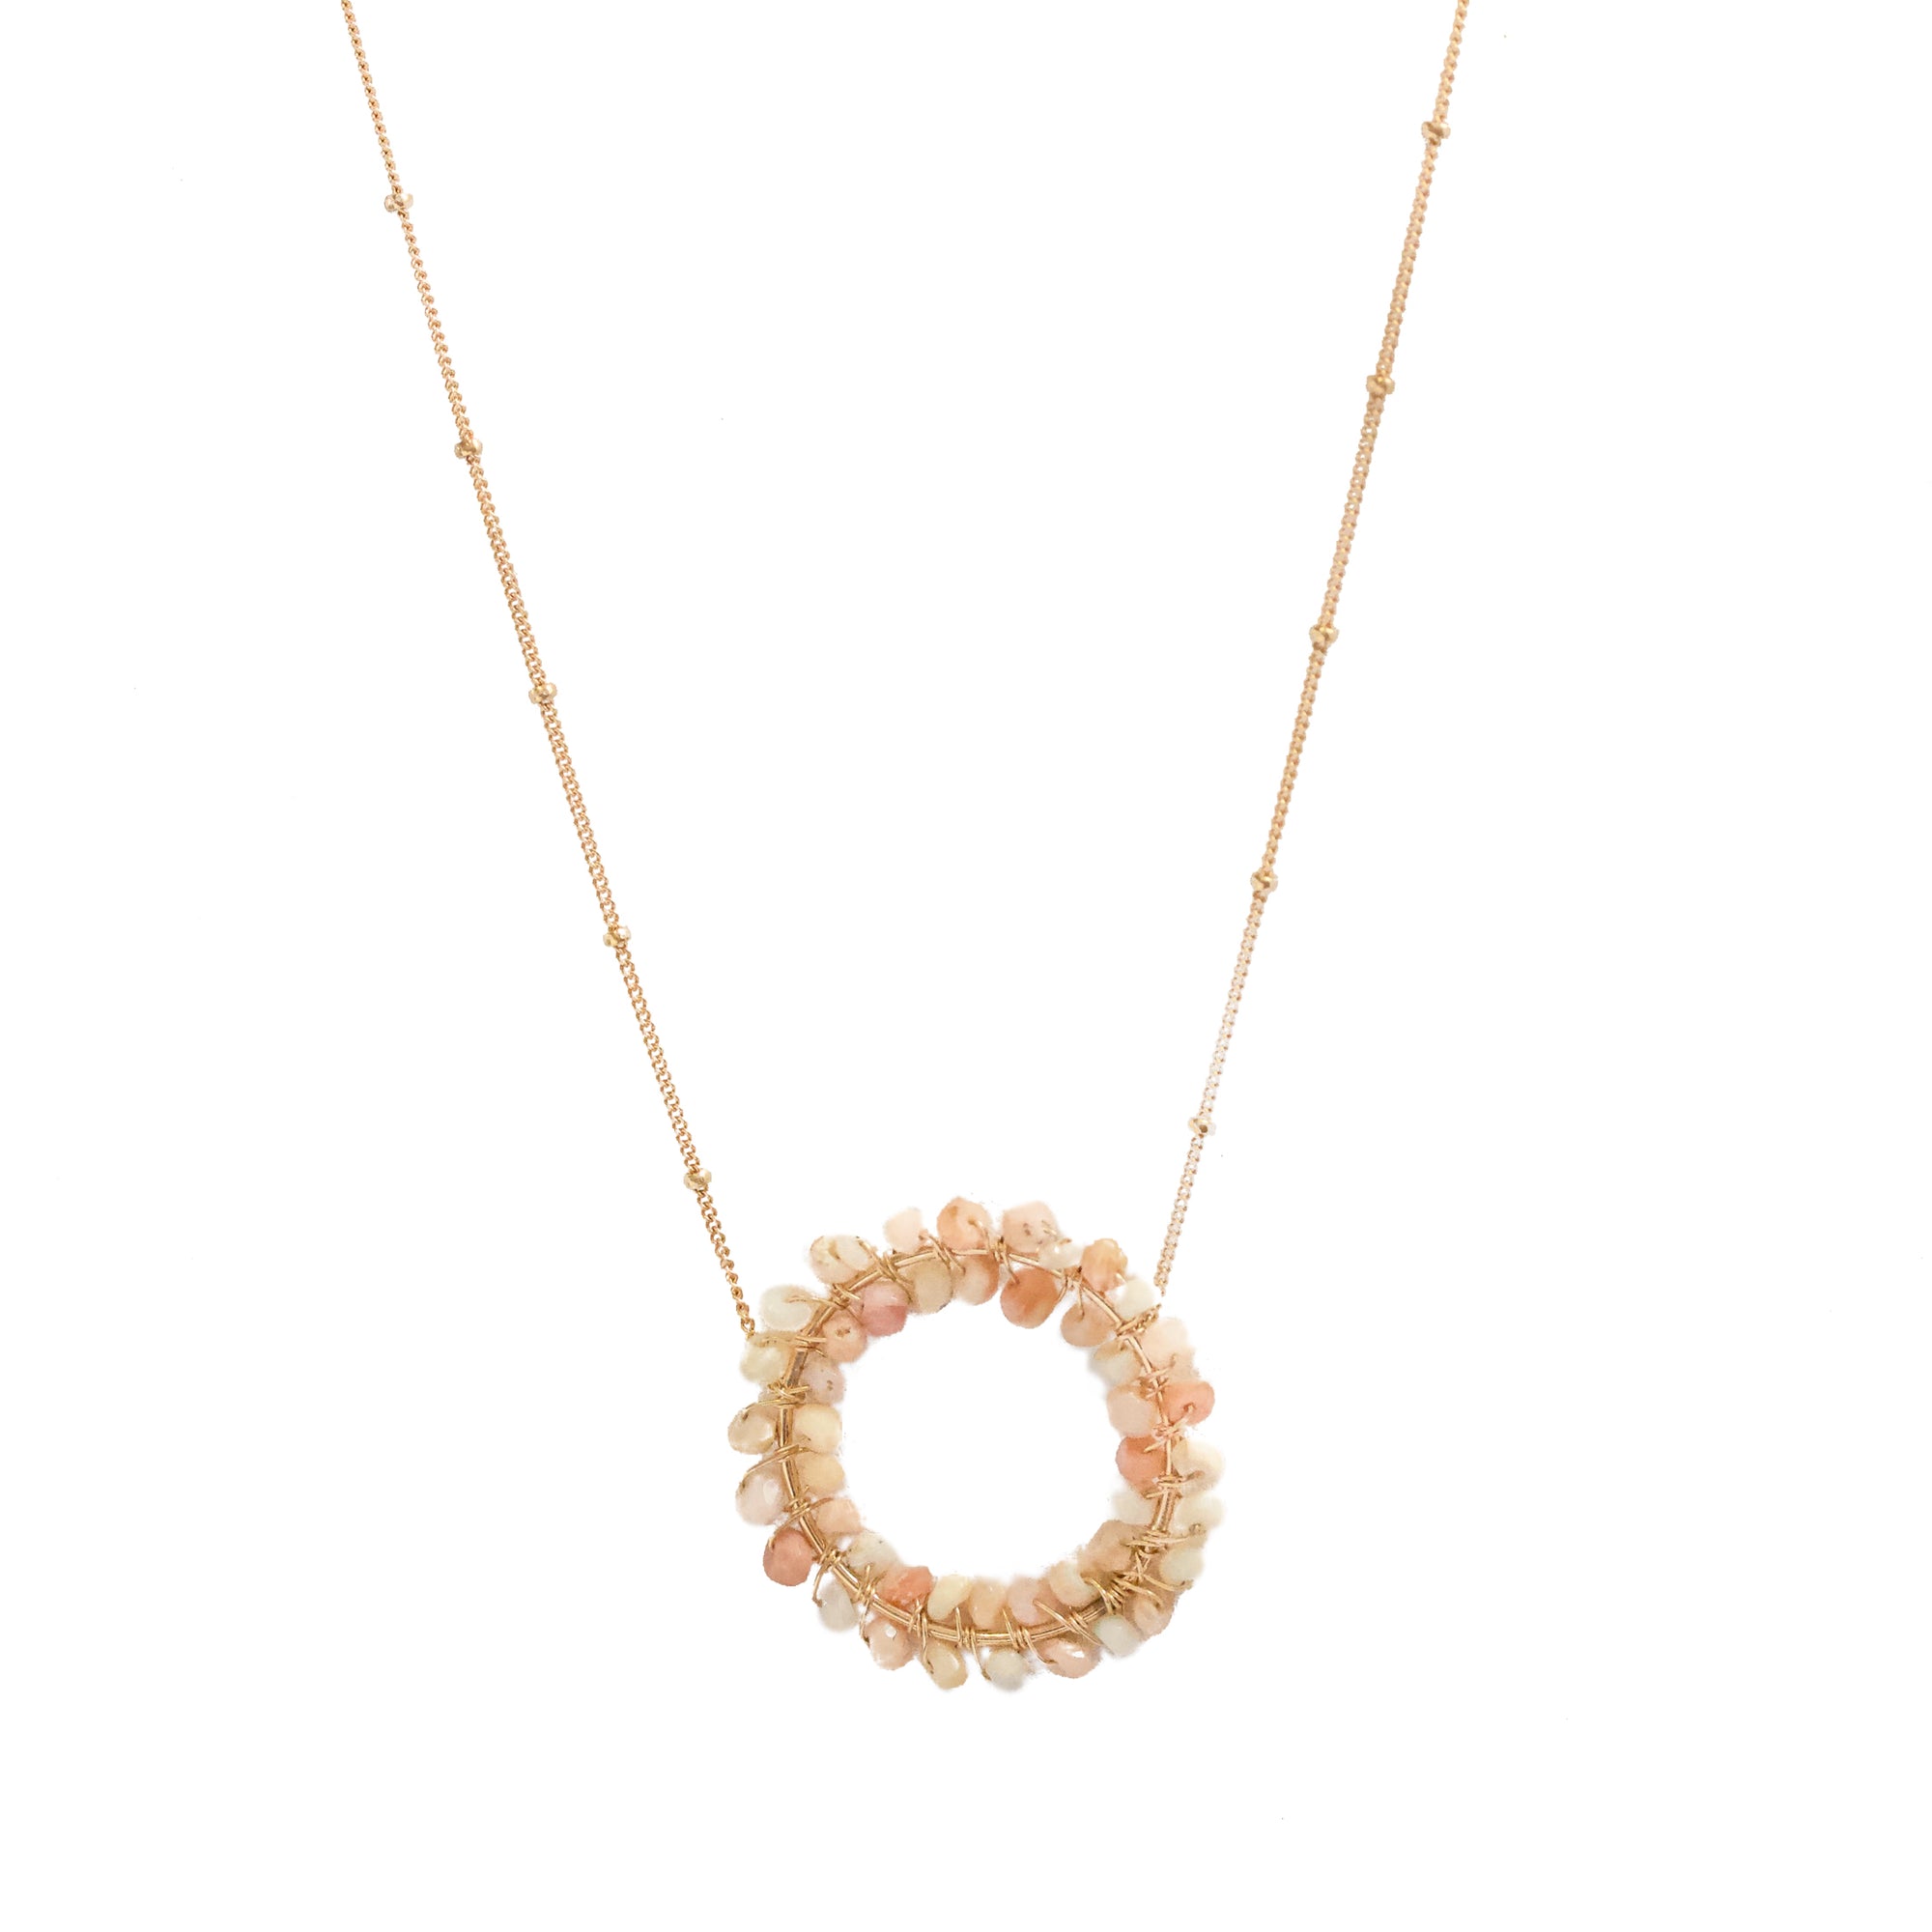 "Harmony" Gold Necklace - Pink Peruvian Opal